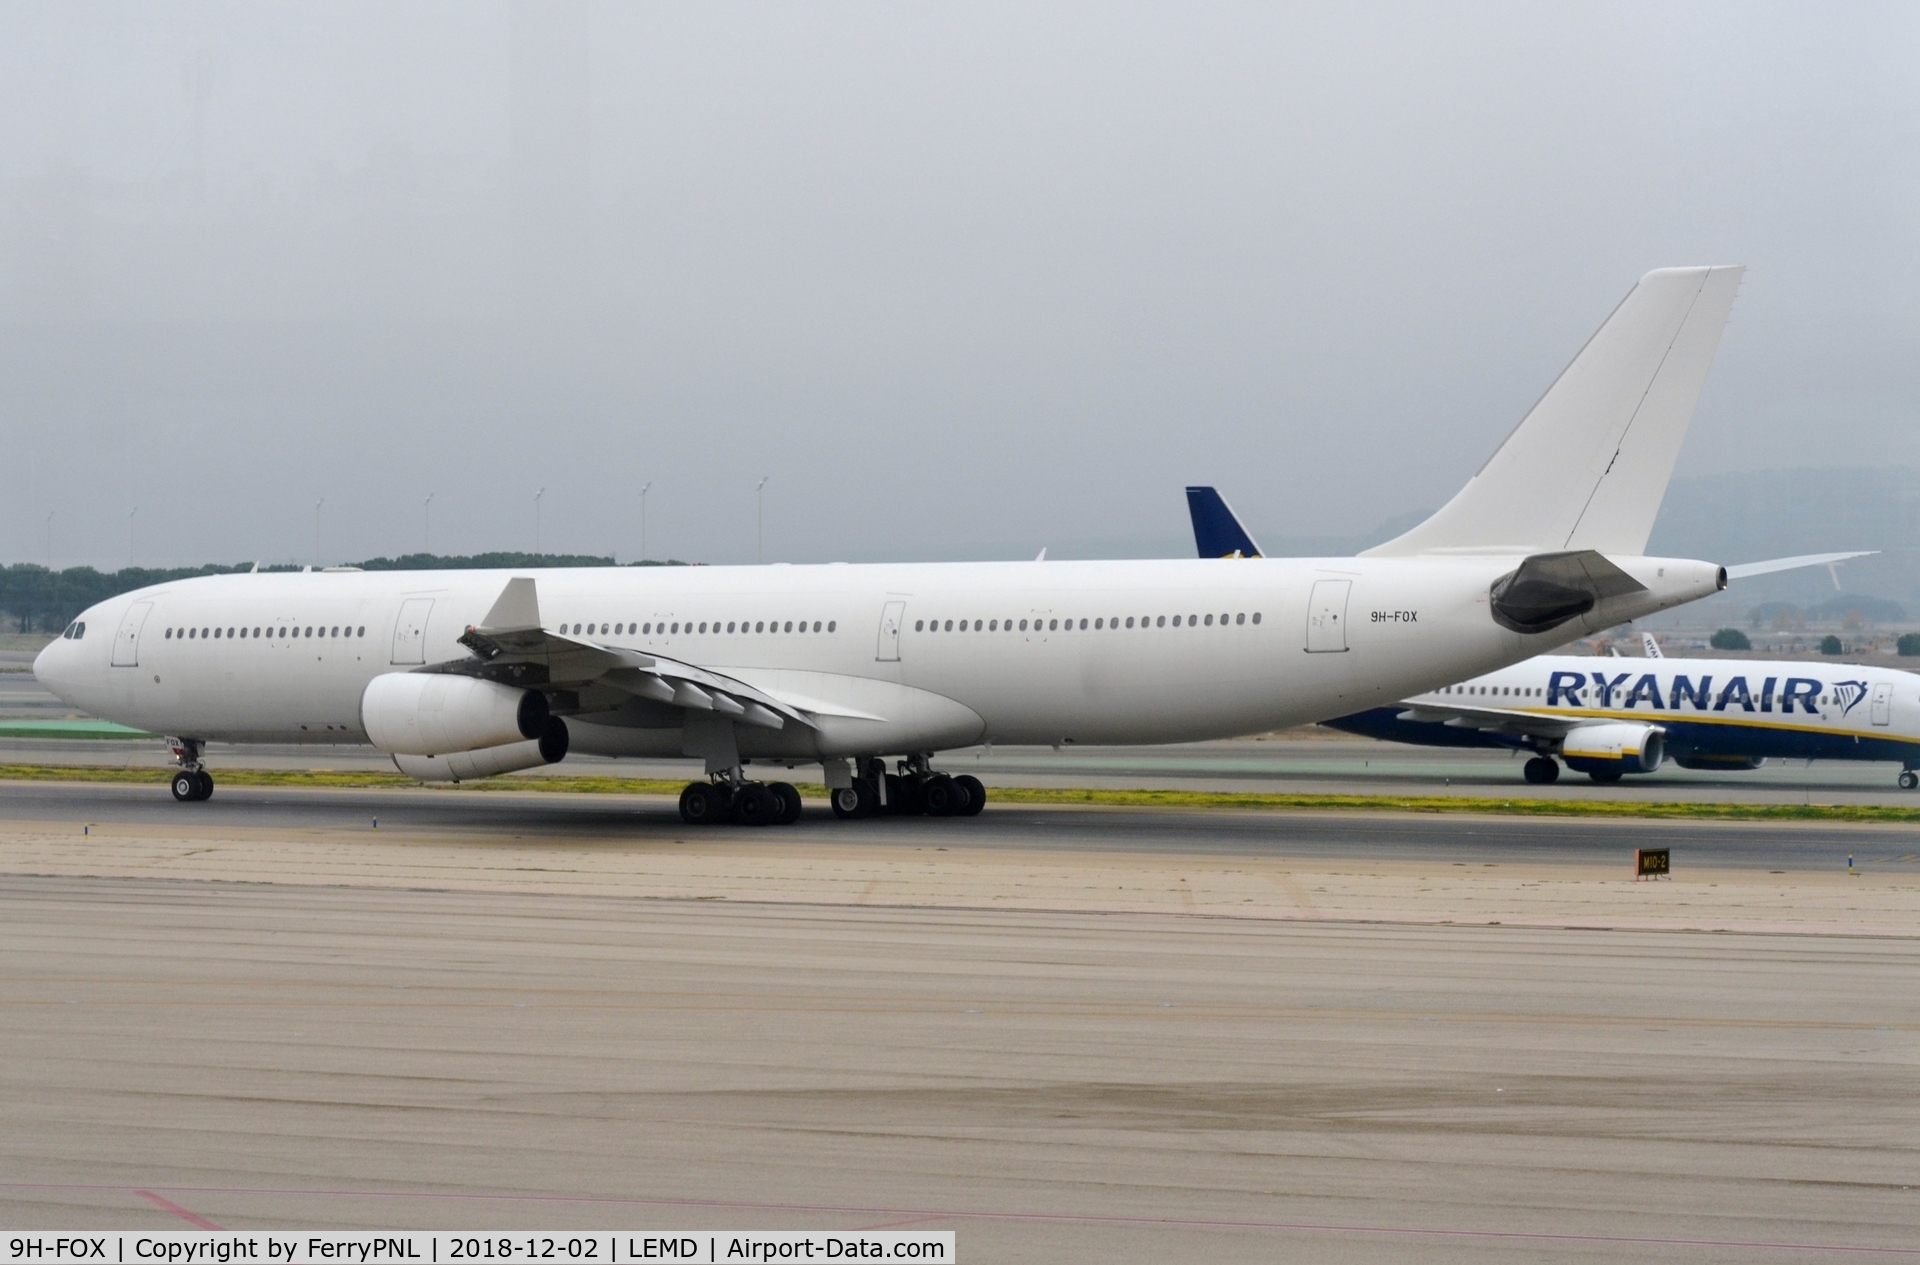 9H-FOX, 1997 Airbus A340-313 C/N 185, Hi Fly A343 taxying for departure.